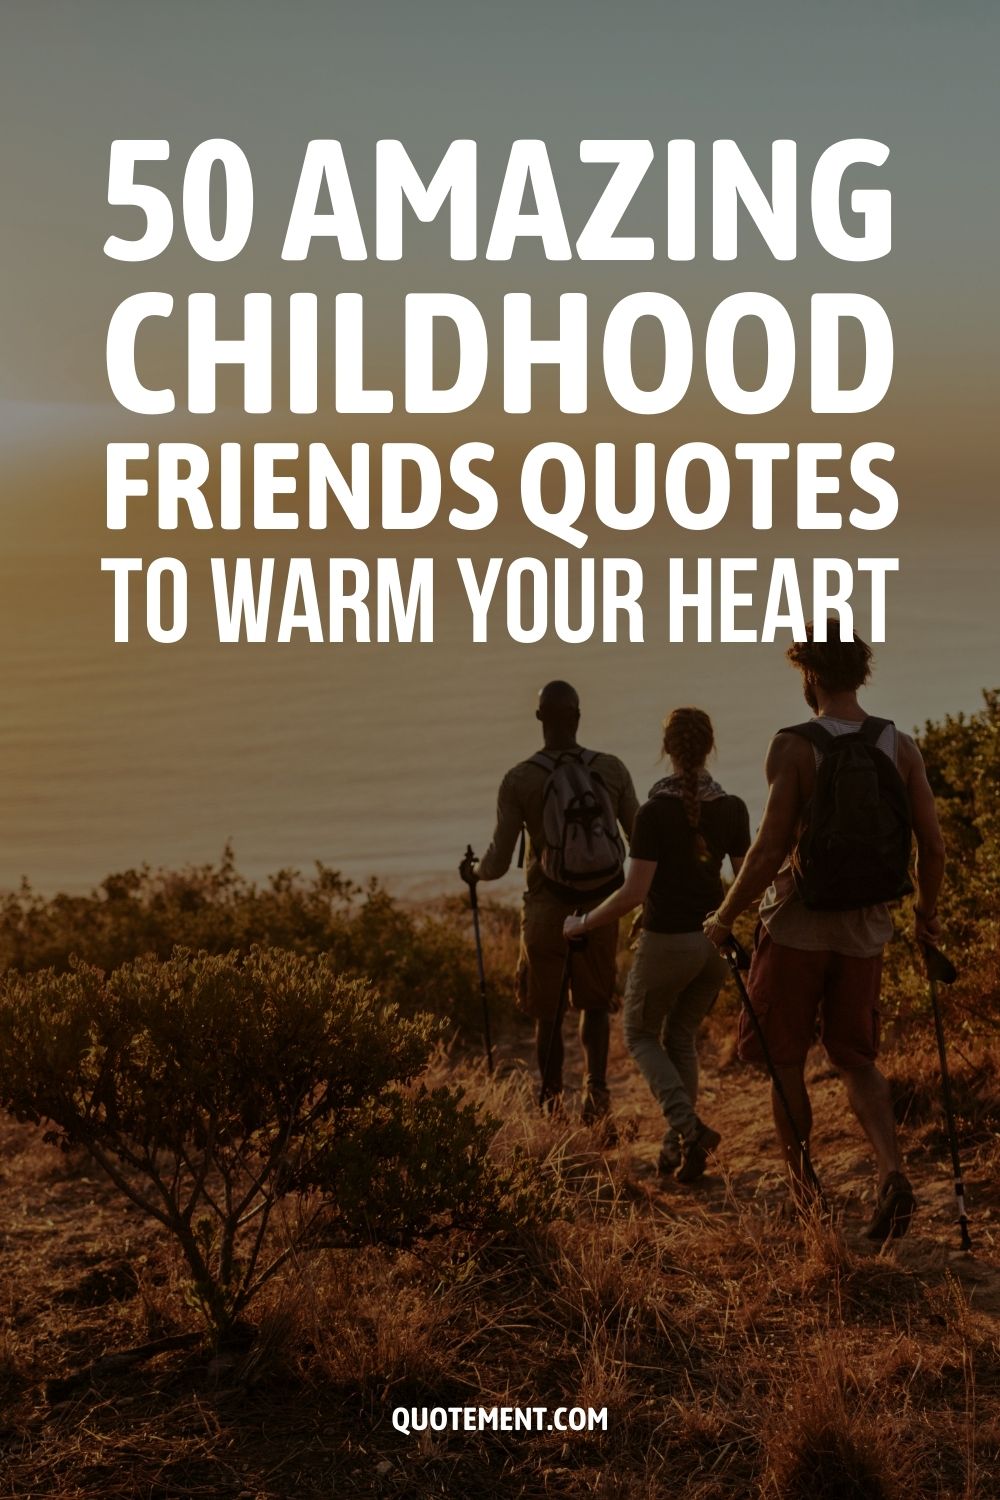 50 Amazing Childhood Friends Quotes To Warm Your Heart